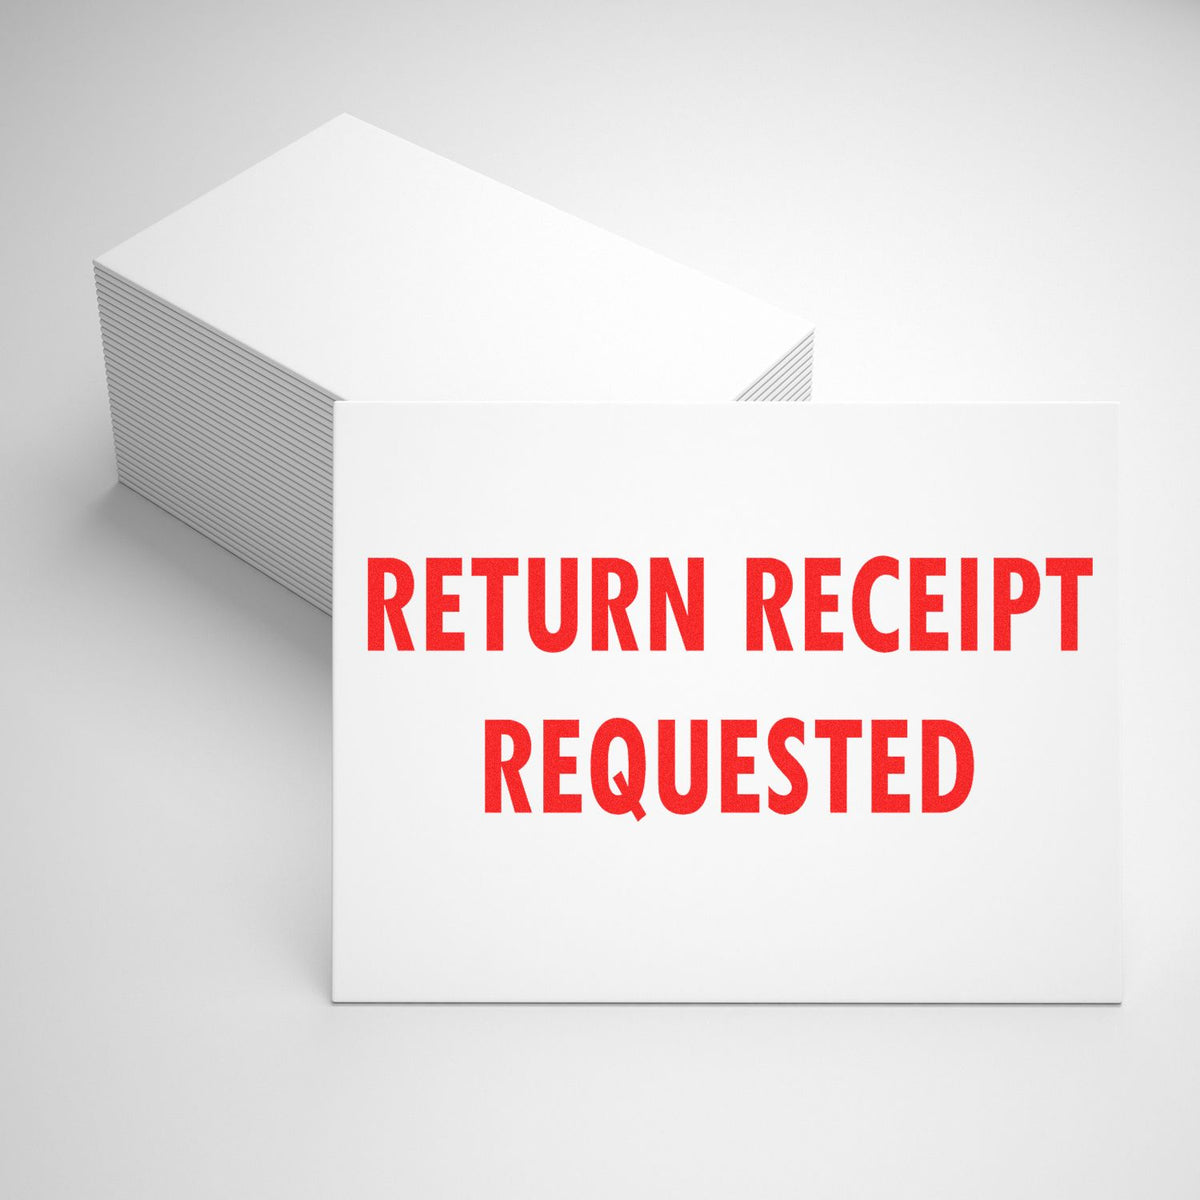 Large Self Inking Return Receipt Requested Stamp In Use Photo